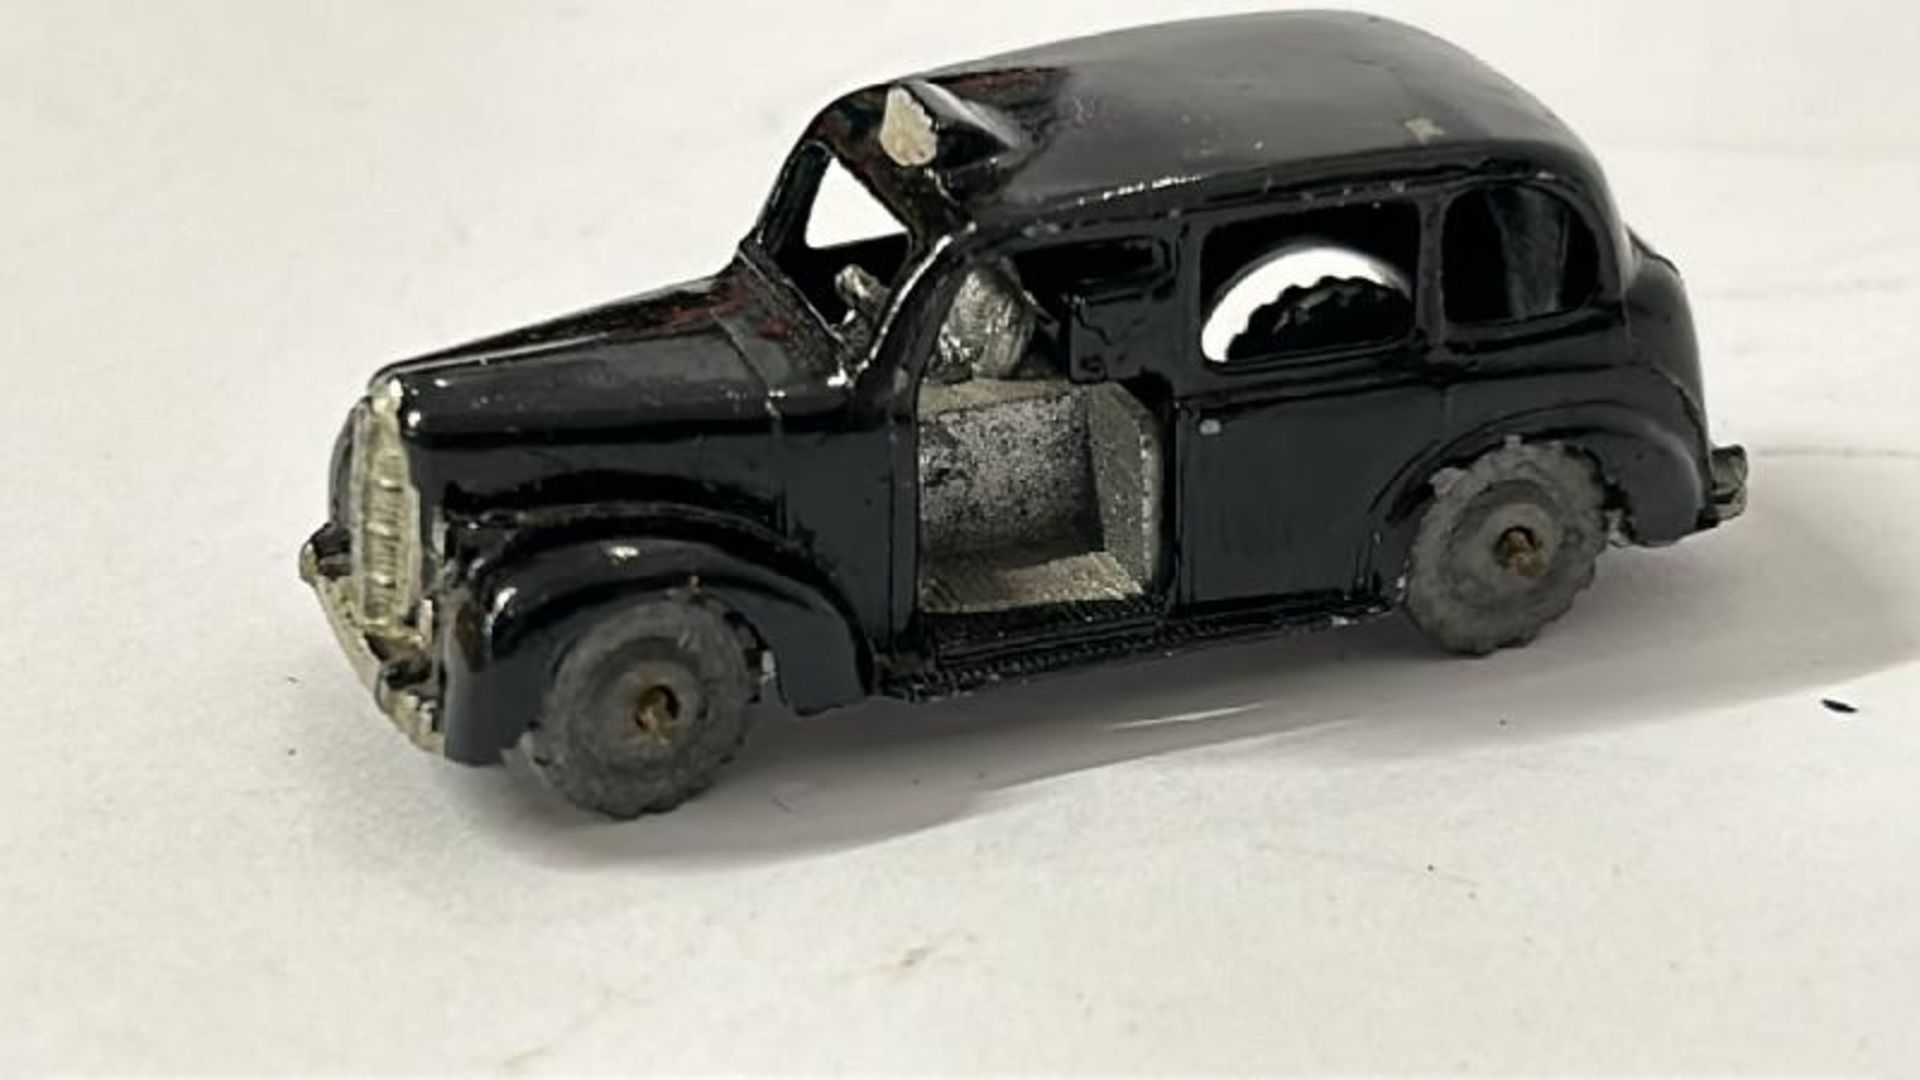 Unboxed Matchbox group including Volkswagen 1600TL no.67, Volkswagen Beatle no.25 and Ford Fire - Image 25 of 28